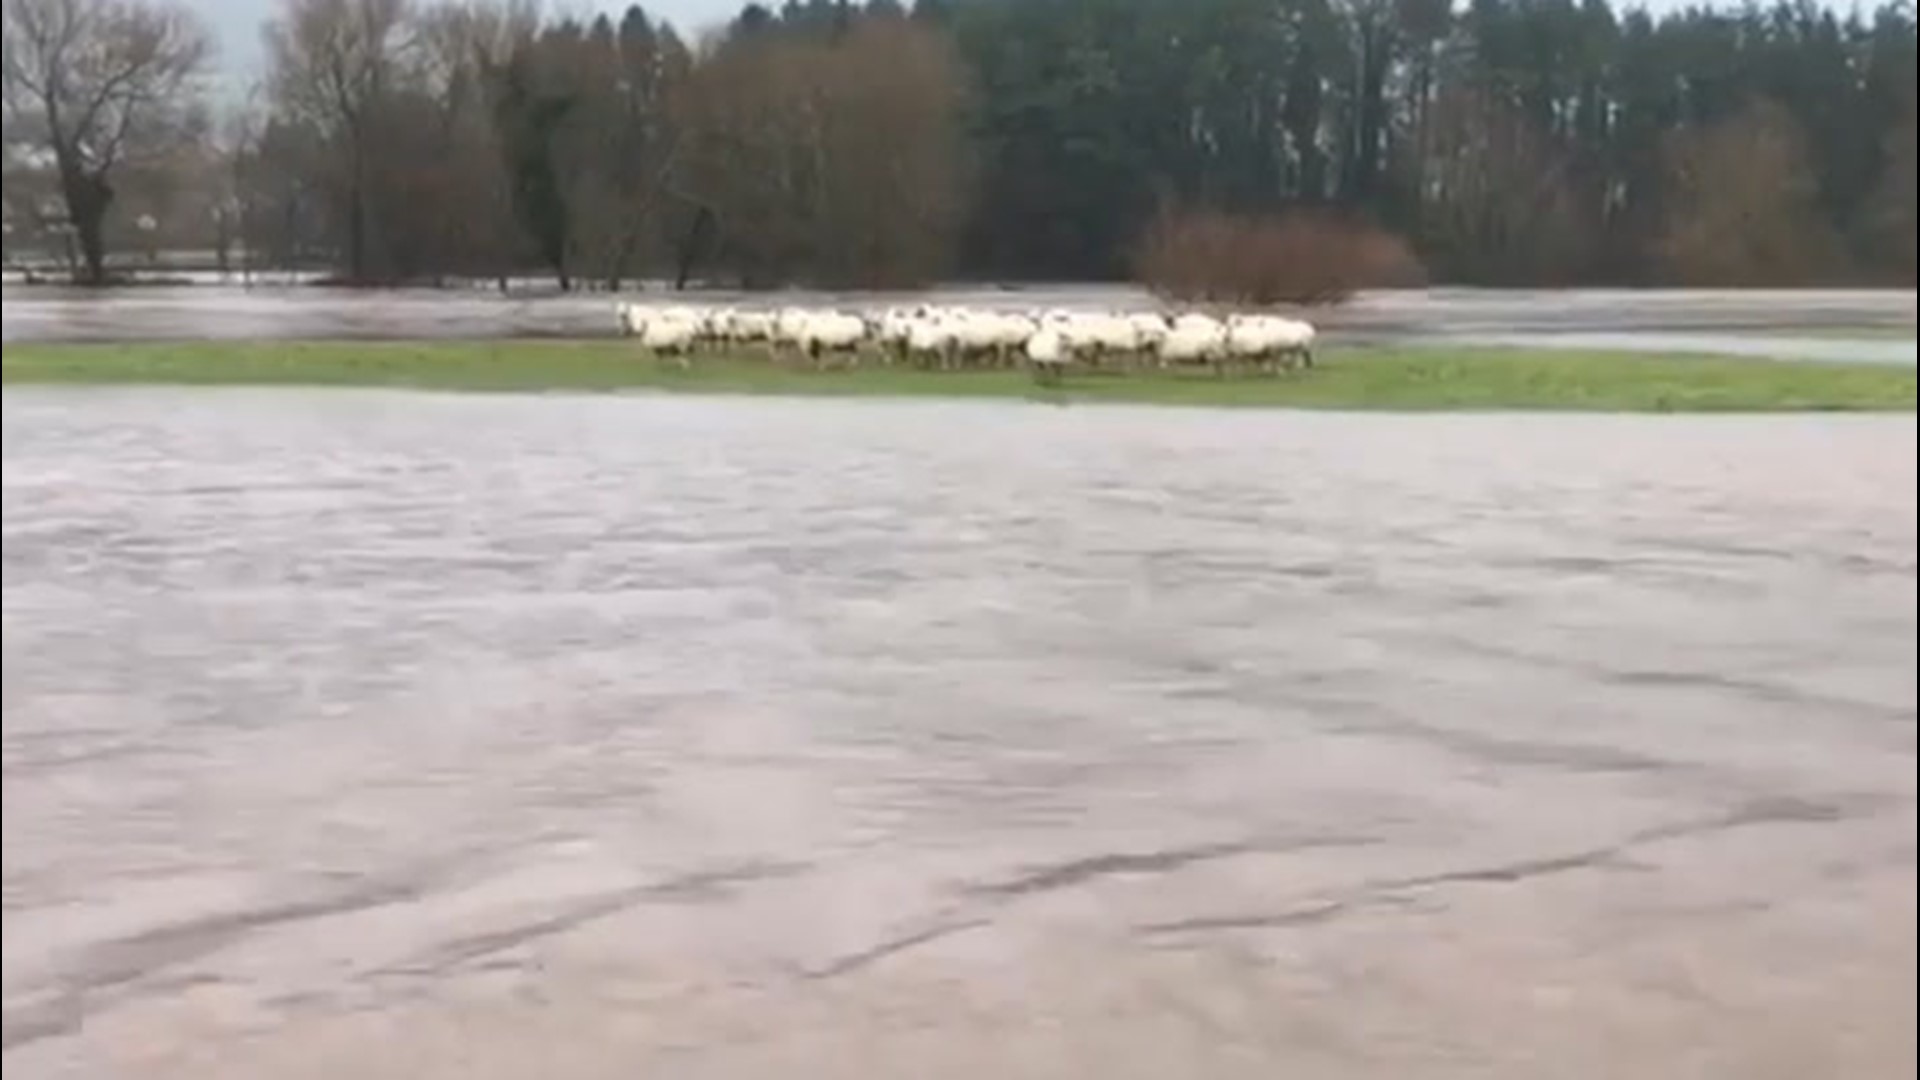 On Jan. 20, a flock of sheep in Llanfoist, Wales, was forced to stay on a small island after Storm Christoph flooded the area.